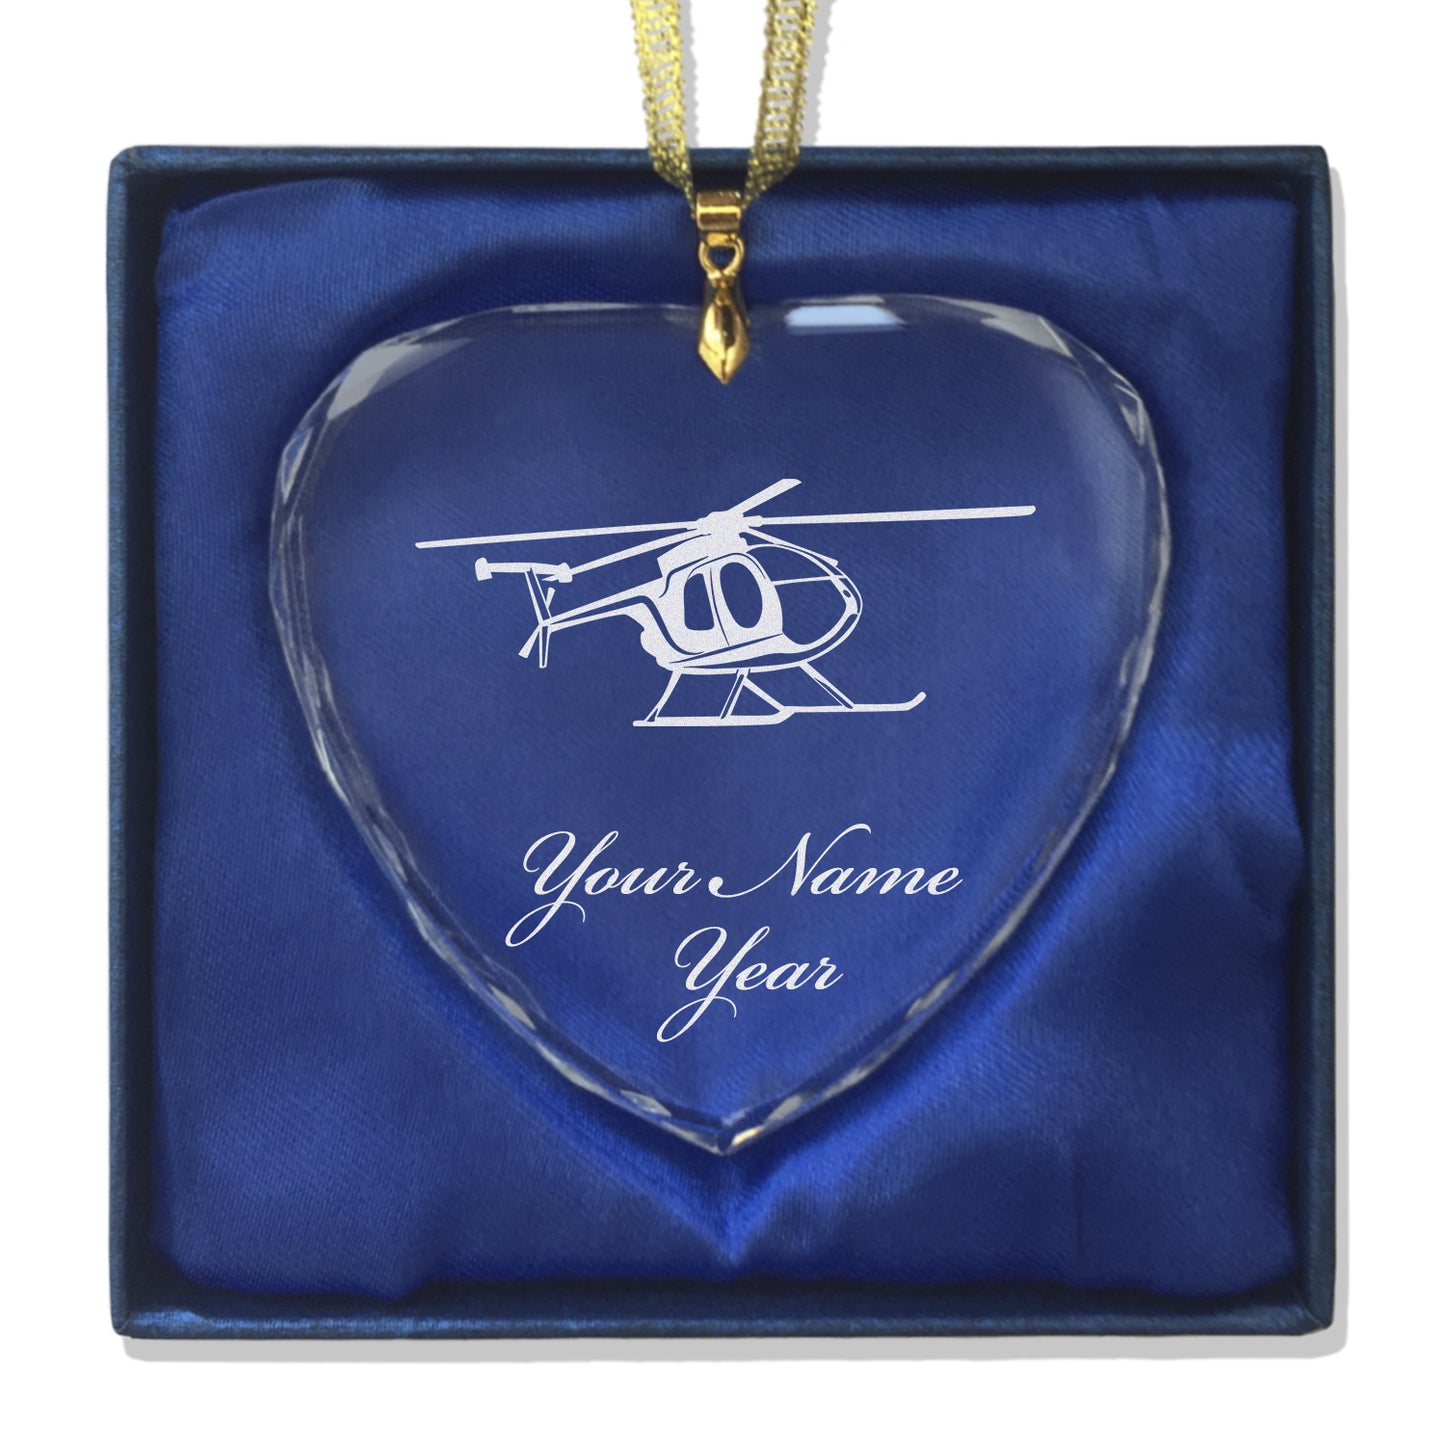 LaserGram Christmas Ornament, Helicopter 1, Personalized Engraving Included (Heart Shape)